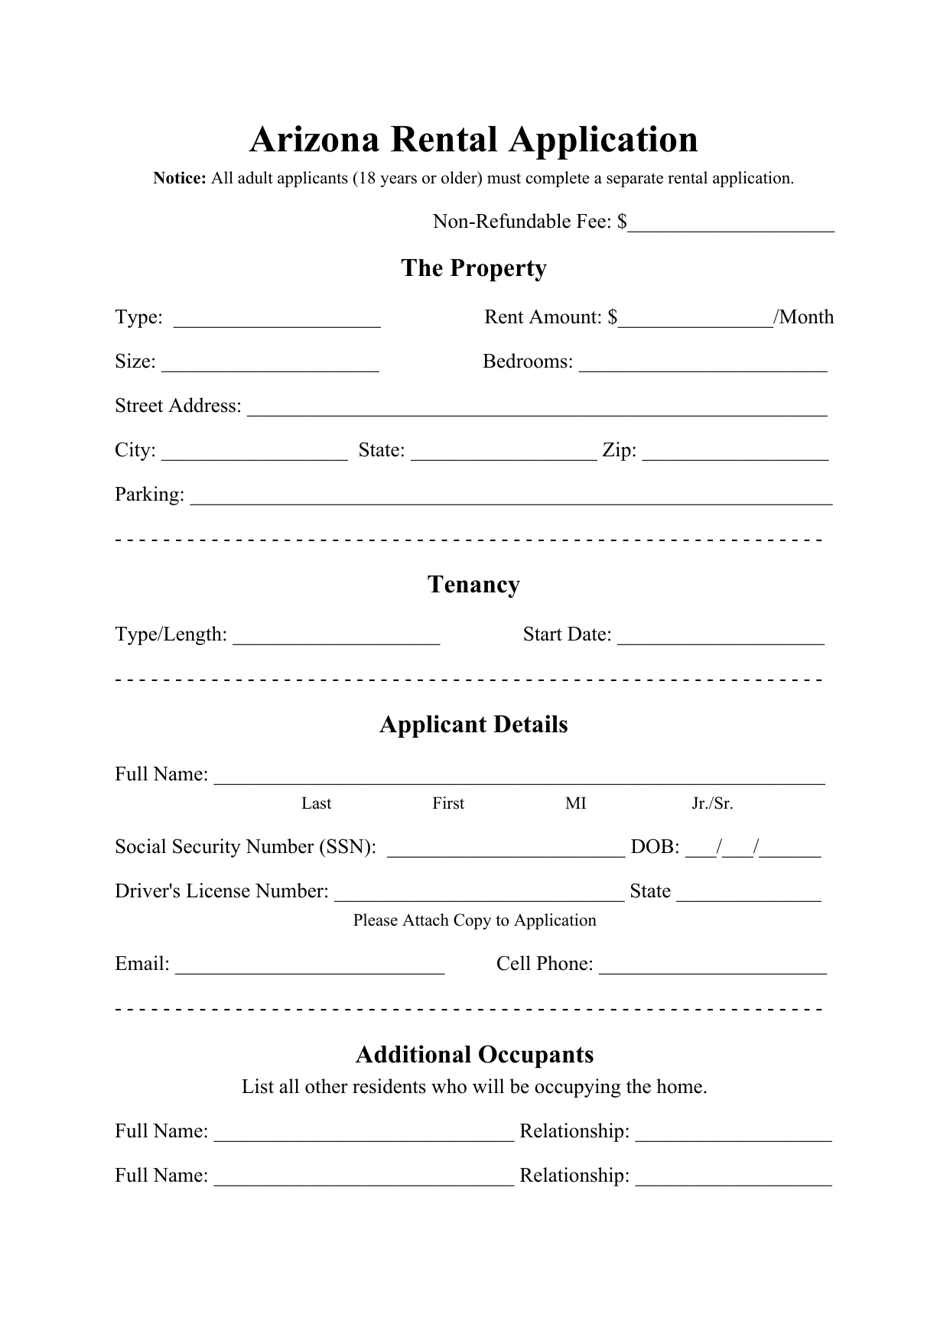 Arizona Rental Application Form Fill Out Sign Online and Download